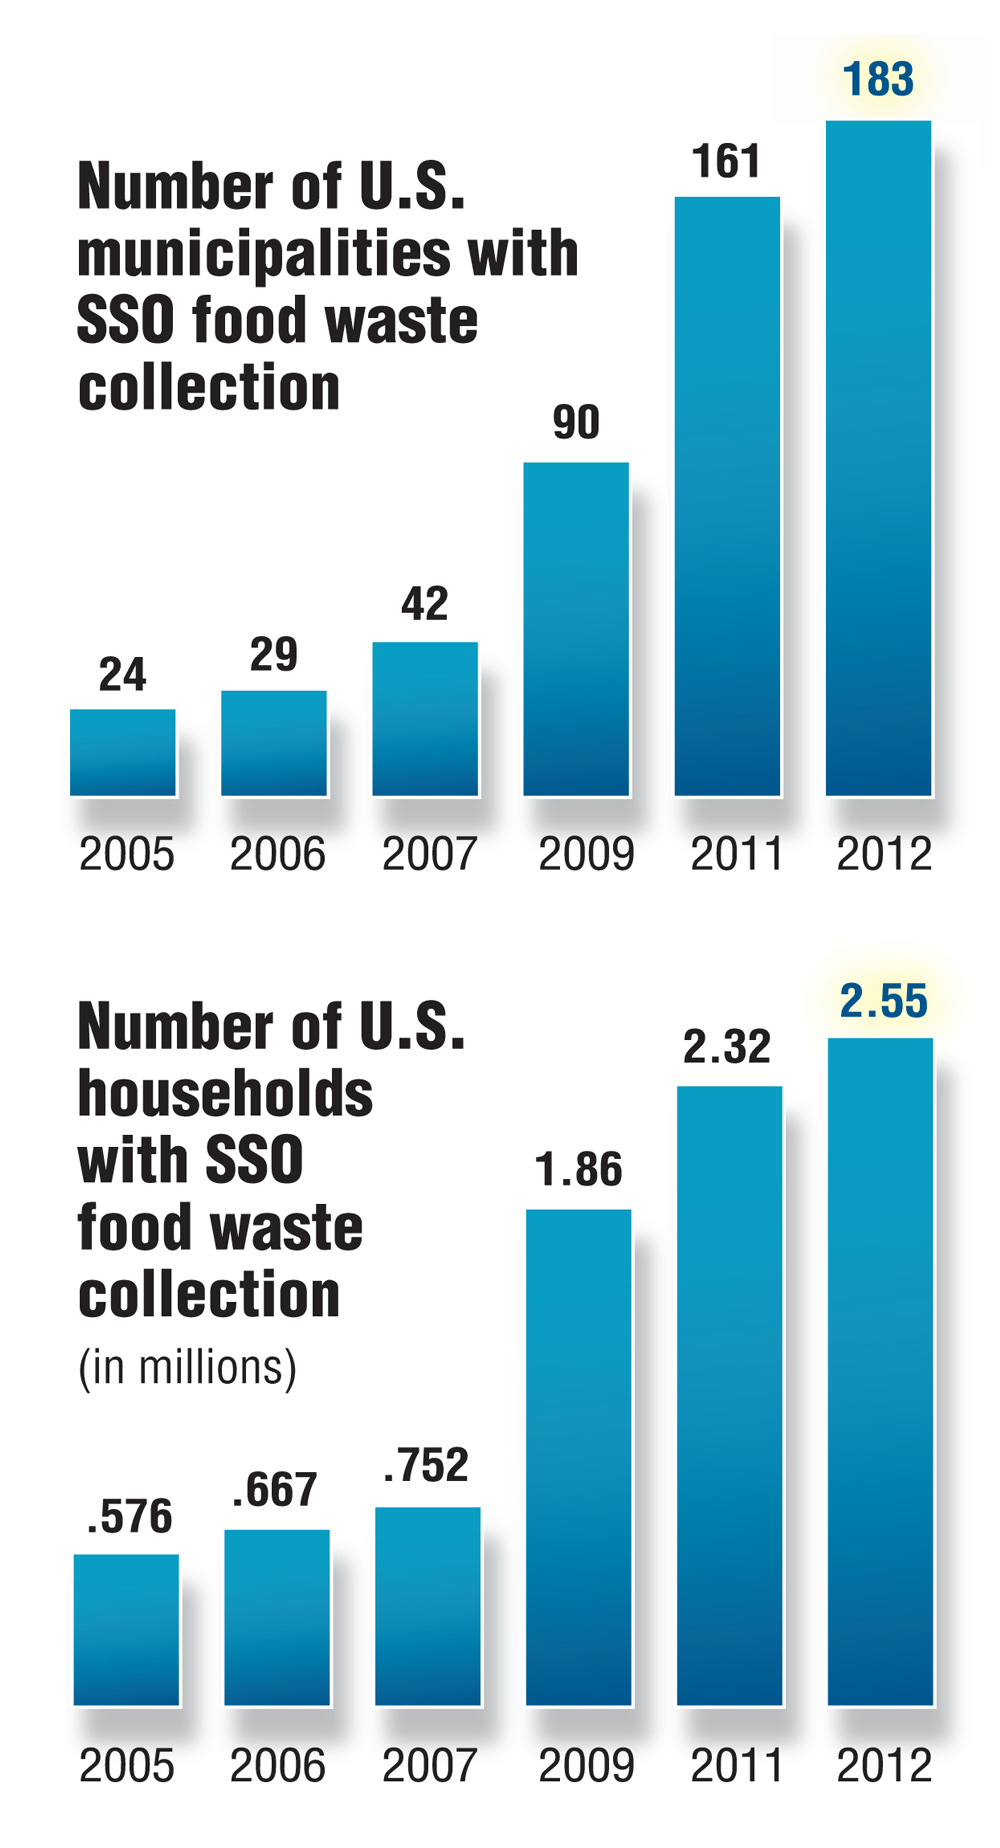 U.S. Food waste collection programs by number of municipalities and number of households